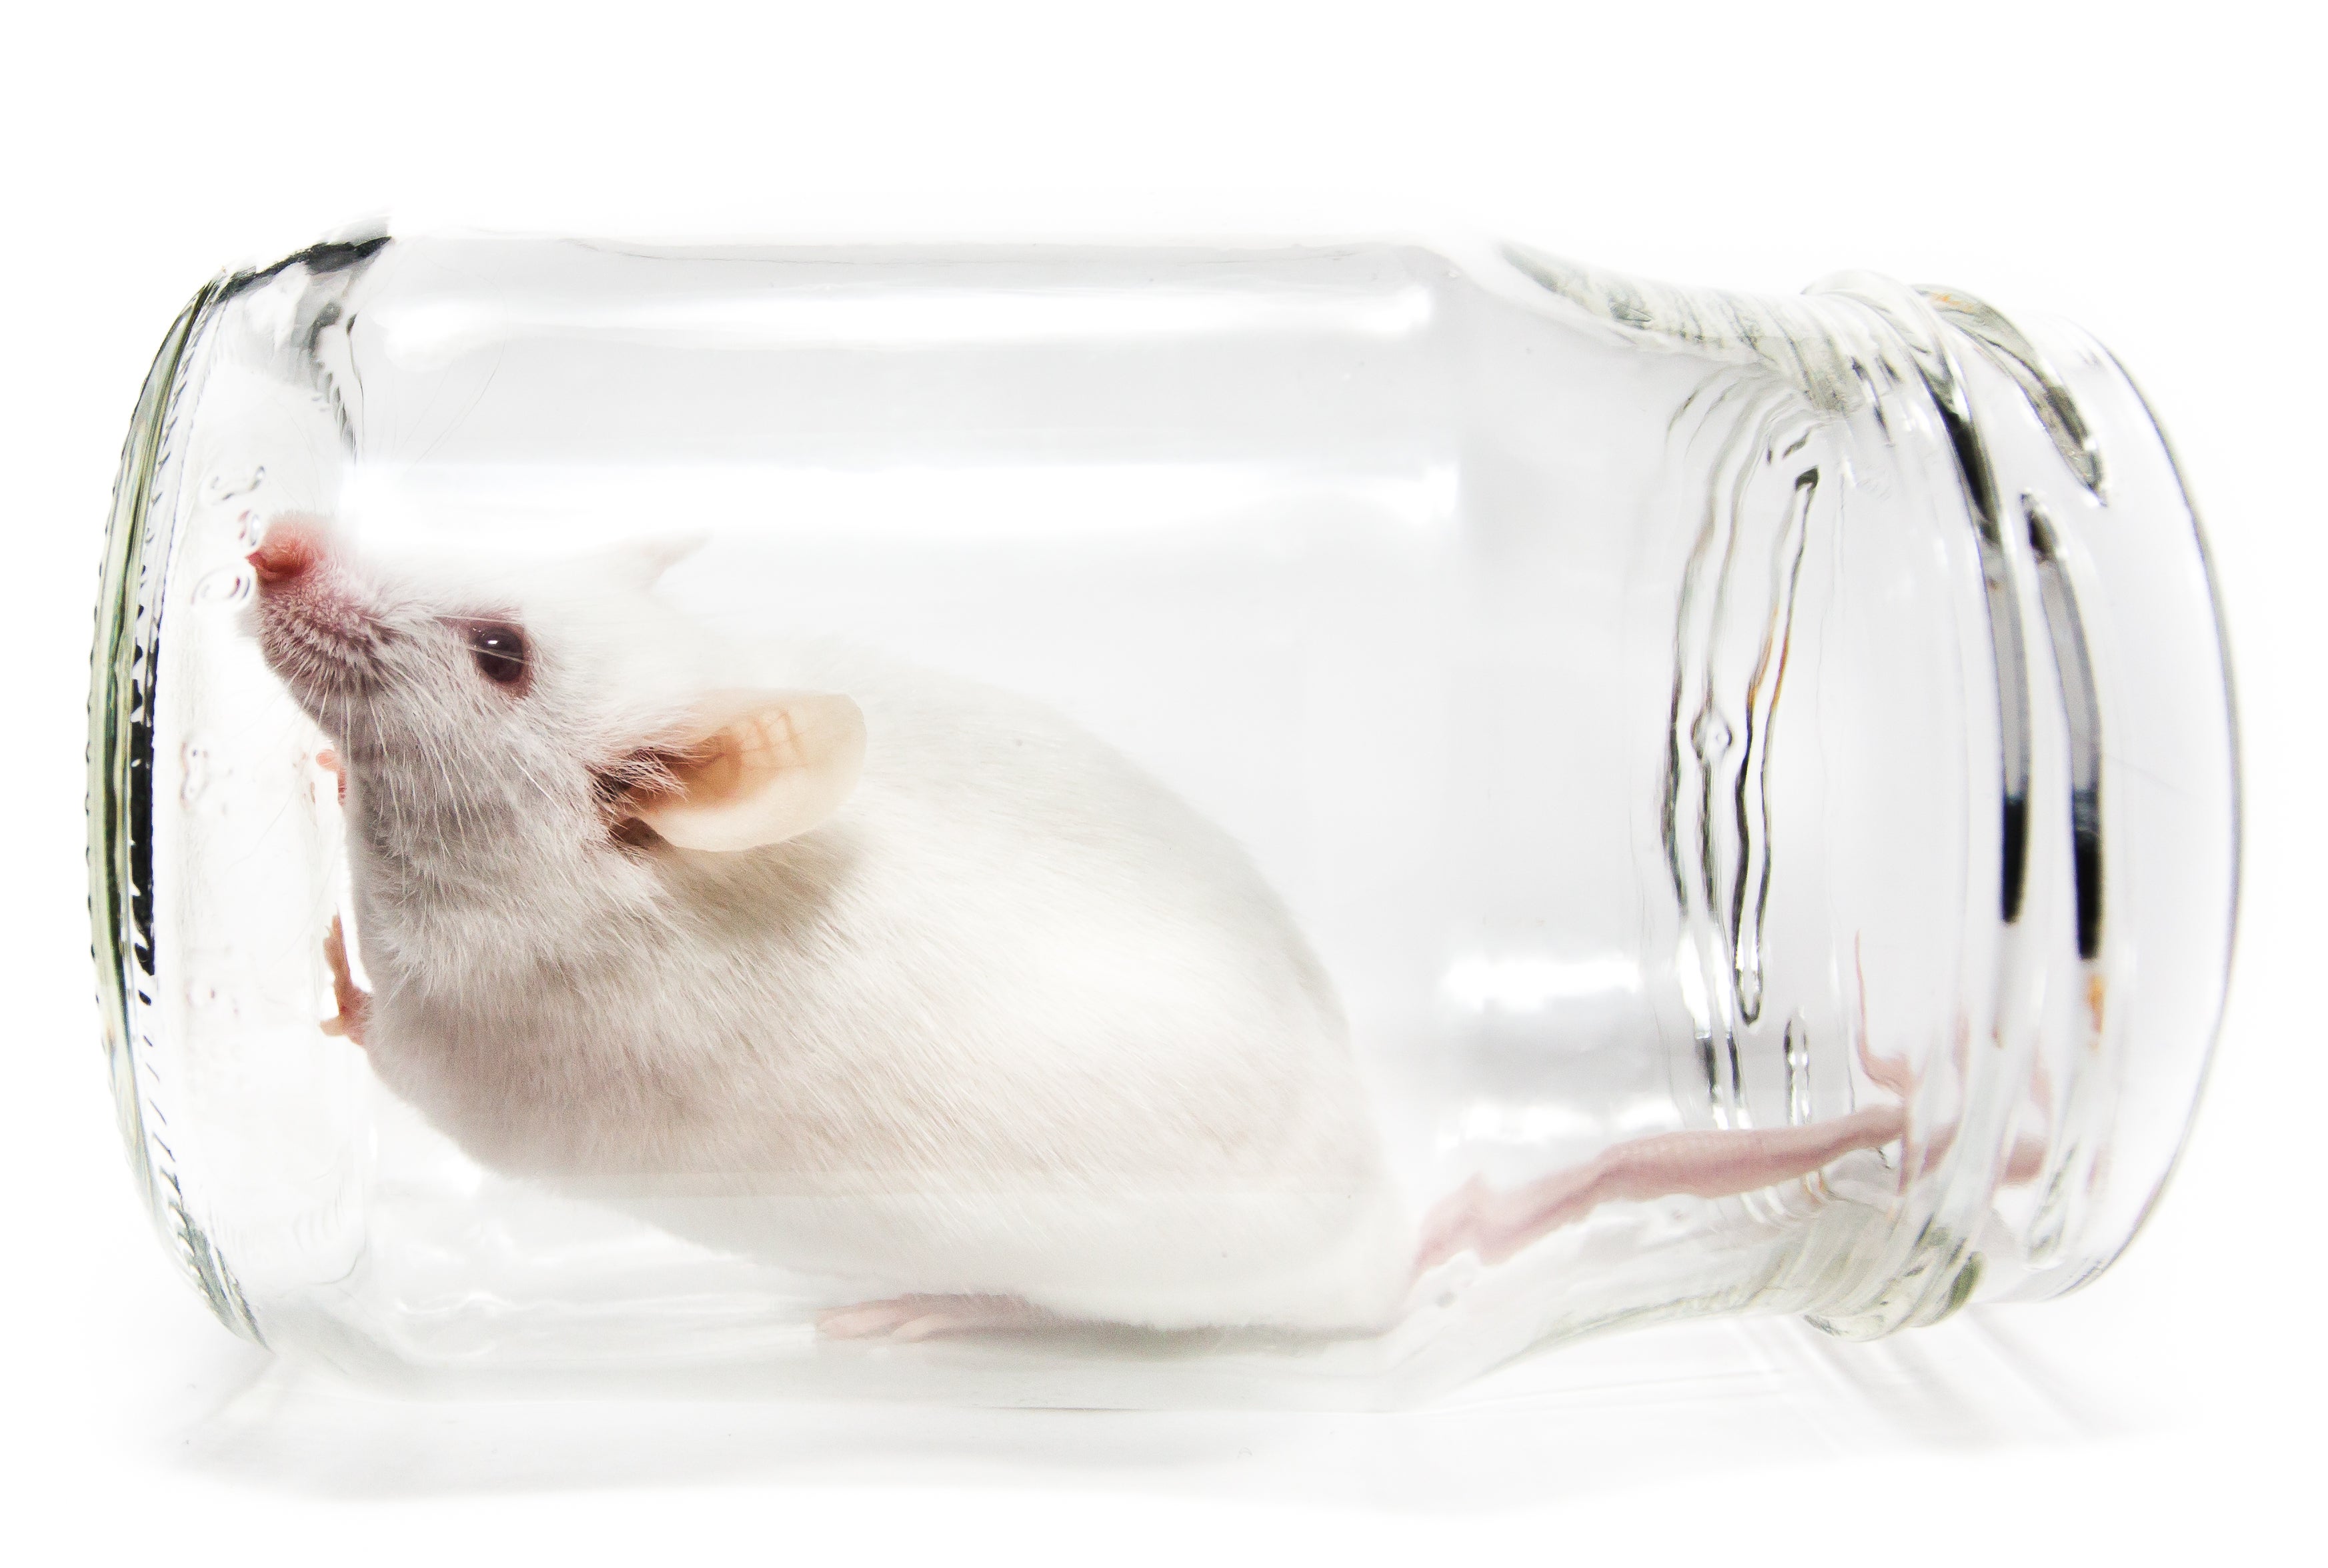 Squeaky Clean Mice Could Be Ruining Research - Scientific American